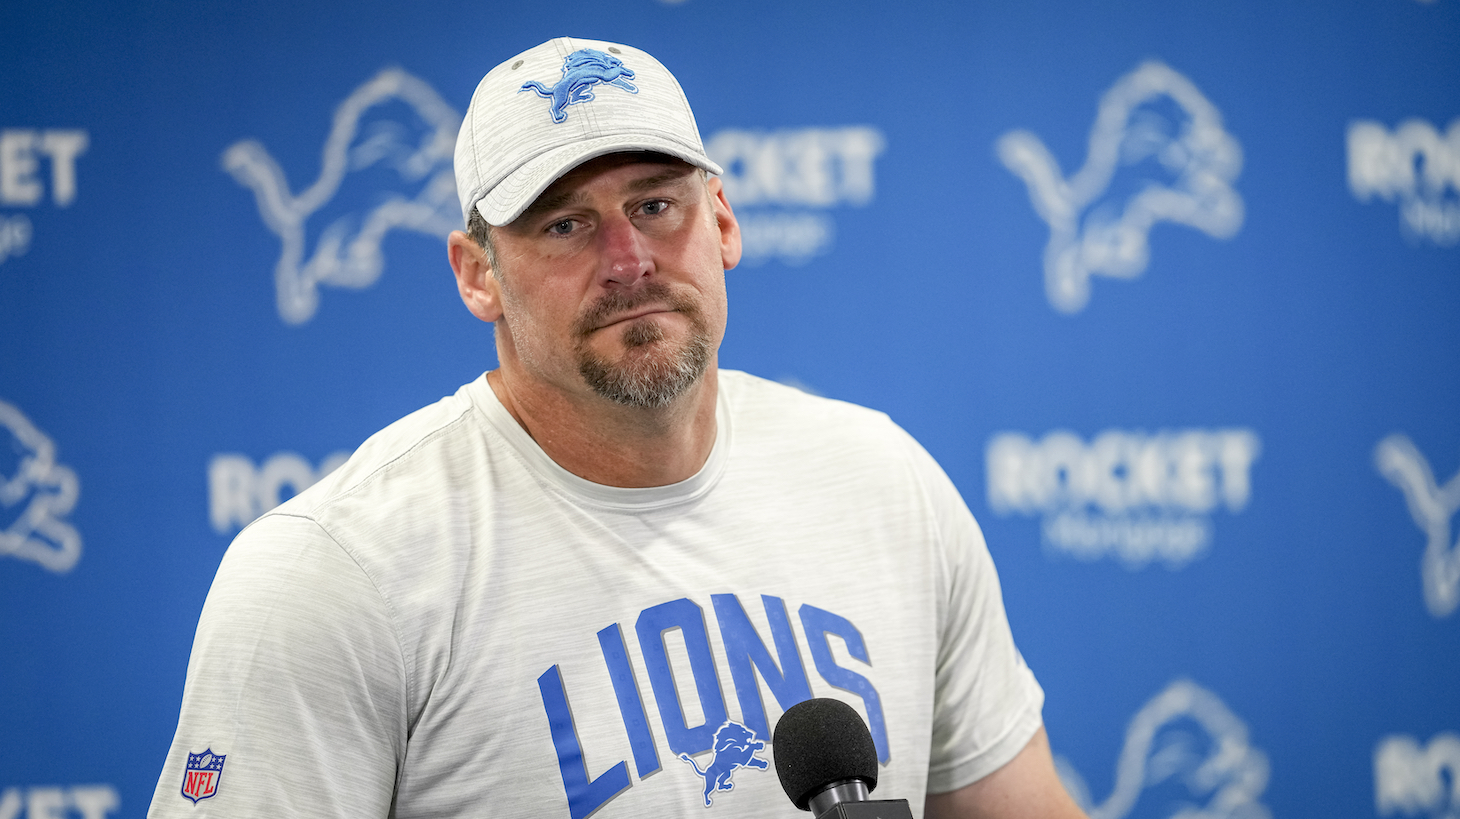 ALLEN PARK, MICHIGAN - JULY 27: Dan Campbell, head coach of the Detroit Lions during the Detroit Lions Training Camp on July 27, 2022 in Allen Park, Michigan. (Photo by Nic Antaya/Getty Images)